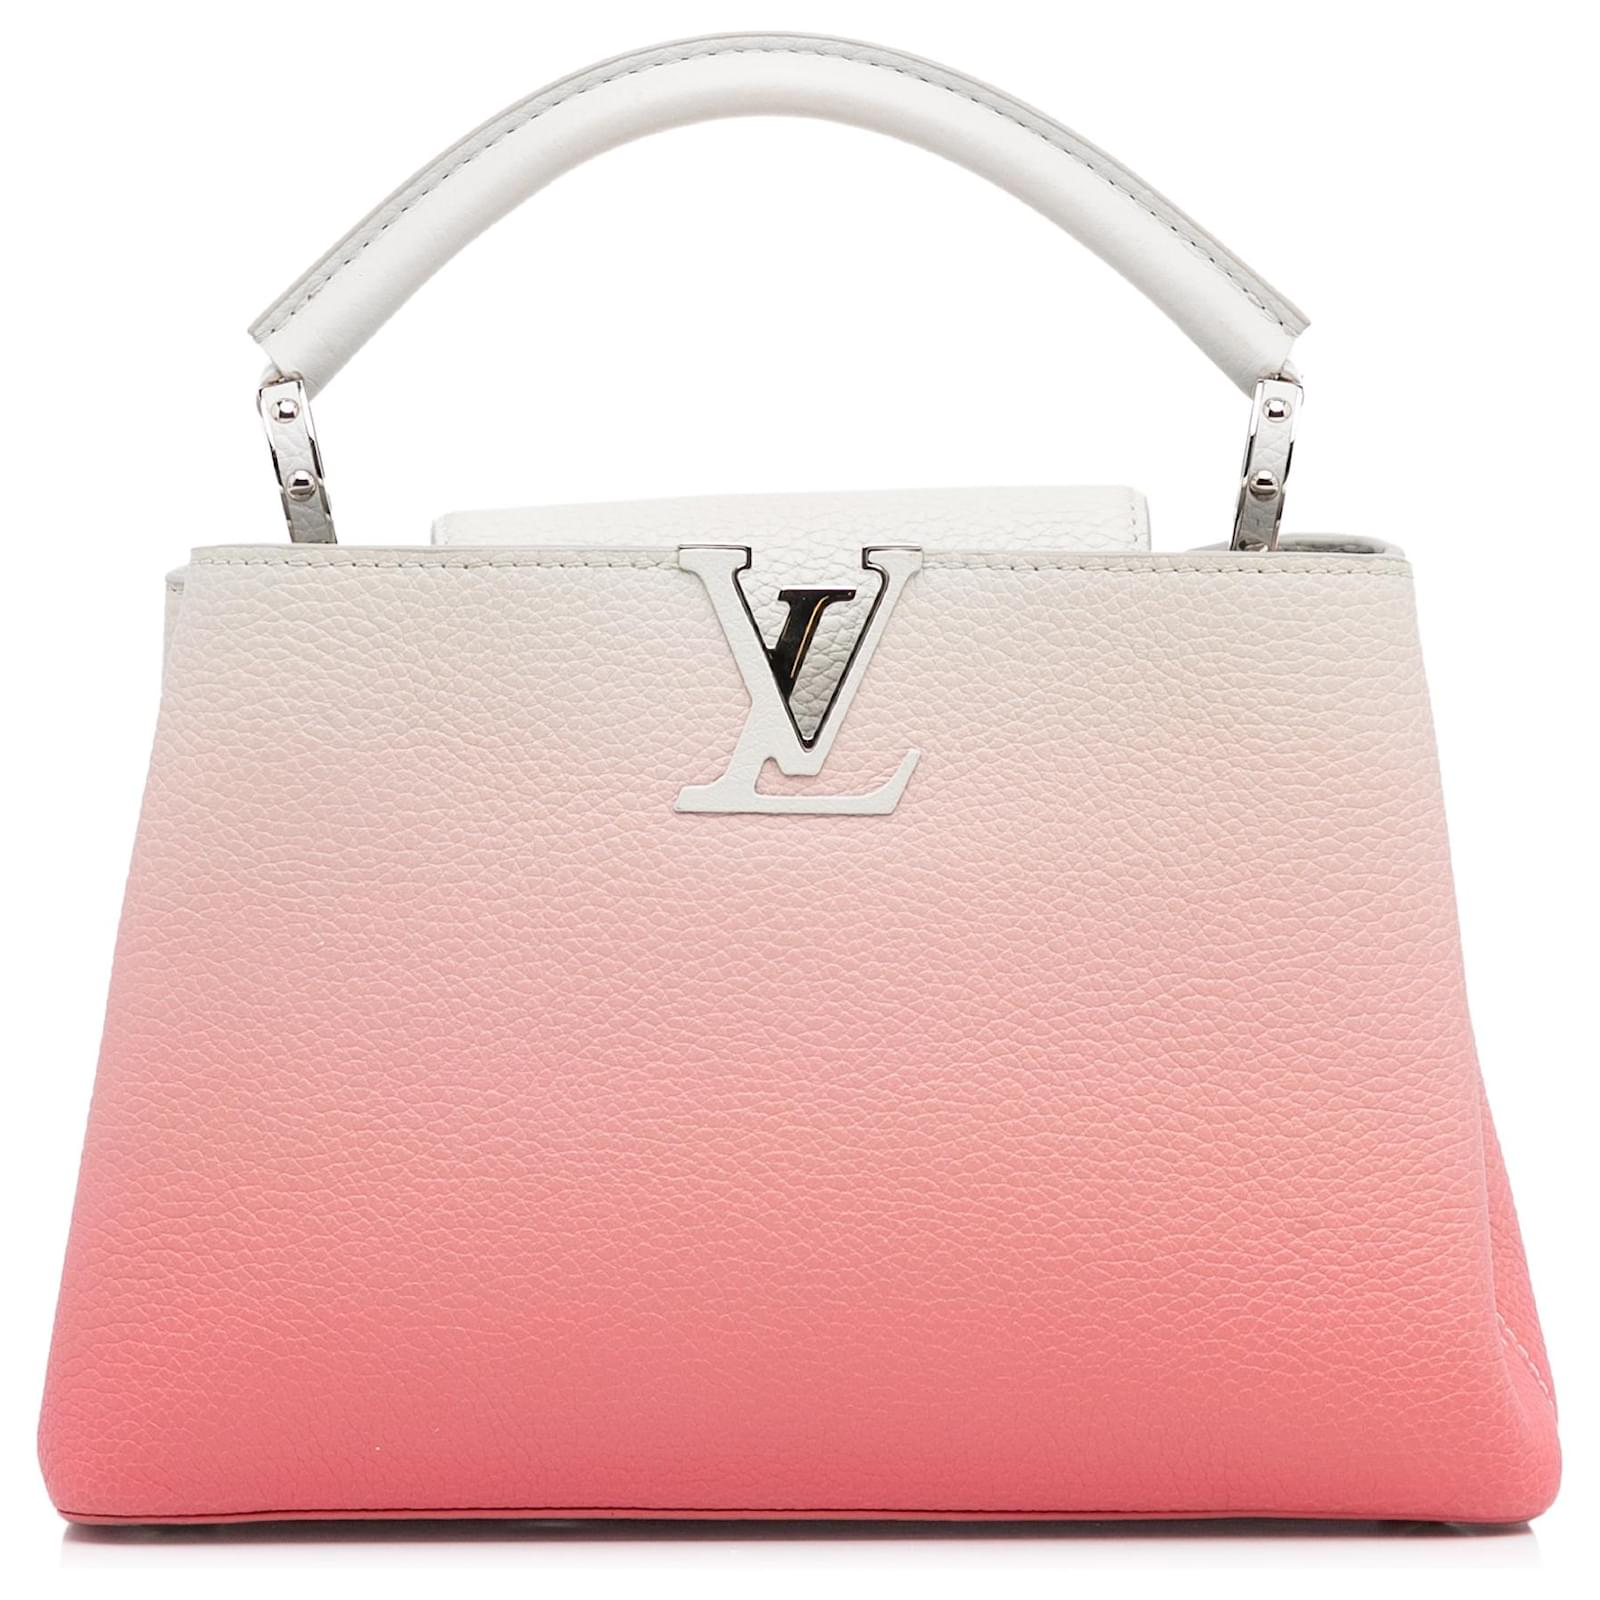 Louis Vuitton Pink LockMe Backpack Leather Pony-style calfskin ref